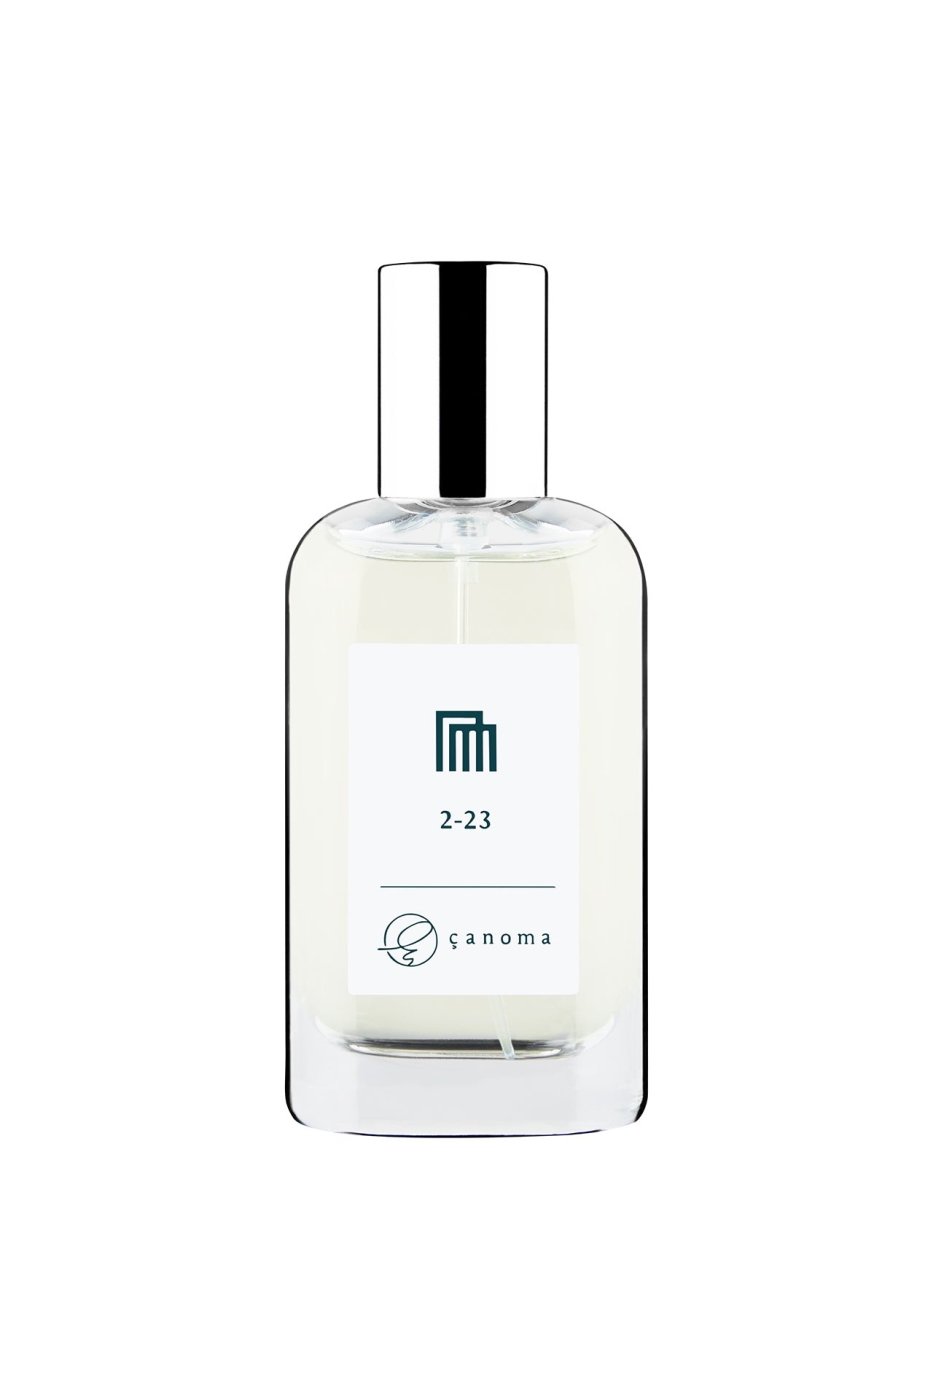 <img class='new_mark_img1' src='https://img.shop-pro.jp/img/new/icons8.gif' style='border:none;display:inline;margin:0px;padding:0px;width:auto;' />canoma サノマ-EAU DE TOILETTE-2-23-胡蝶